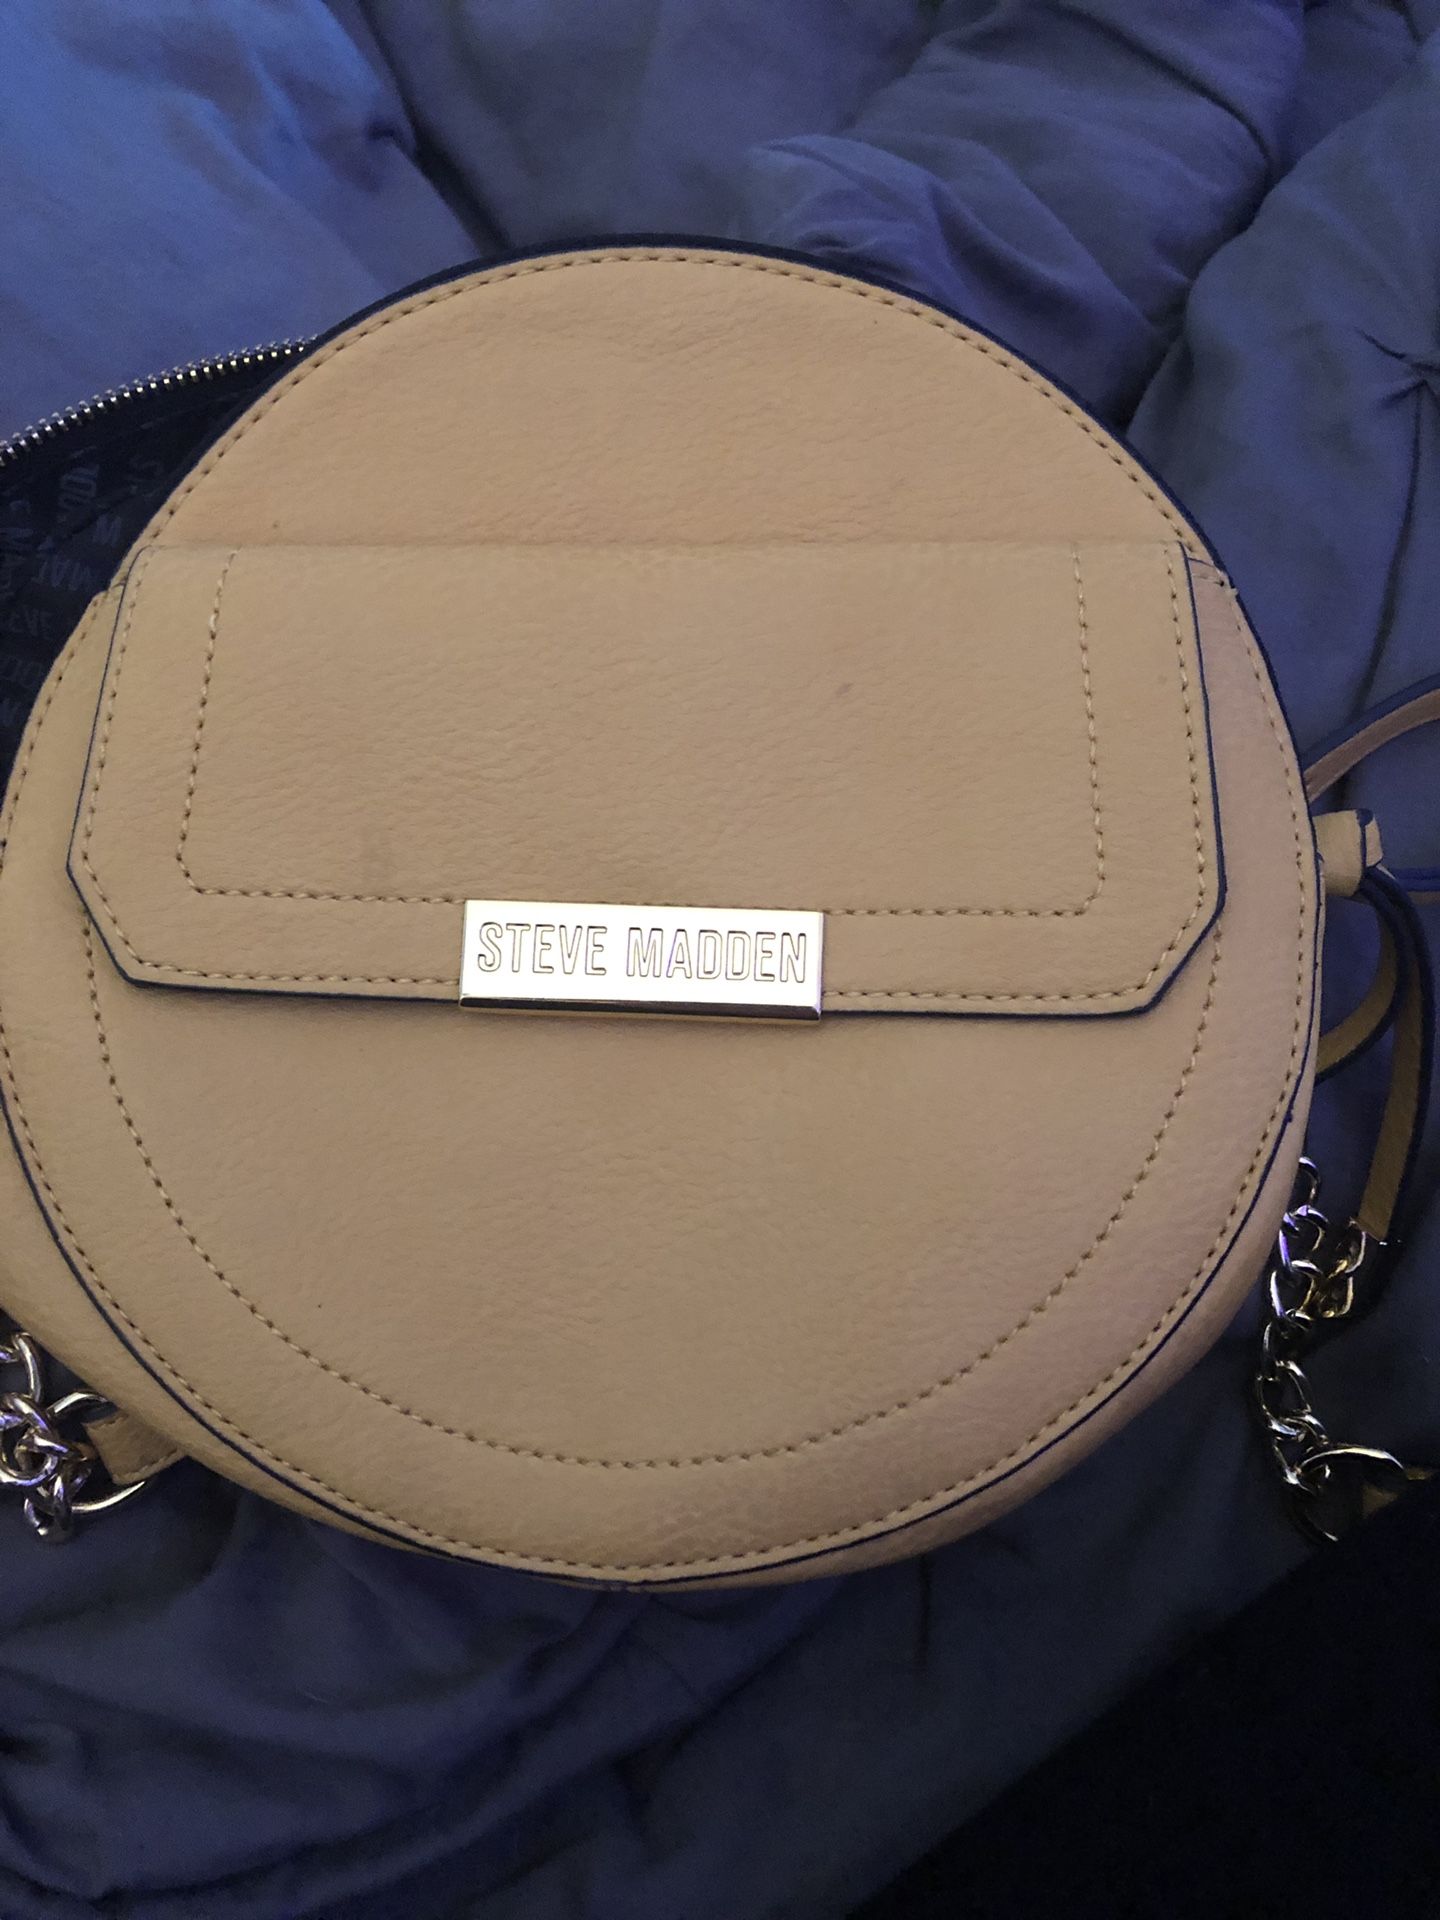 Two barely used Steve Madden cross body bags